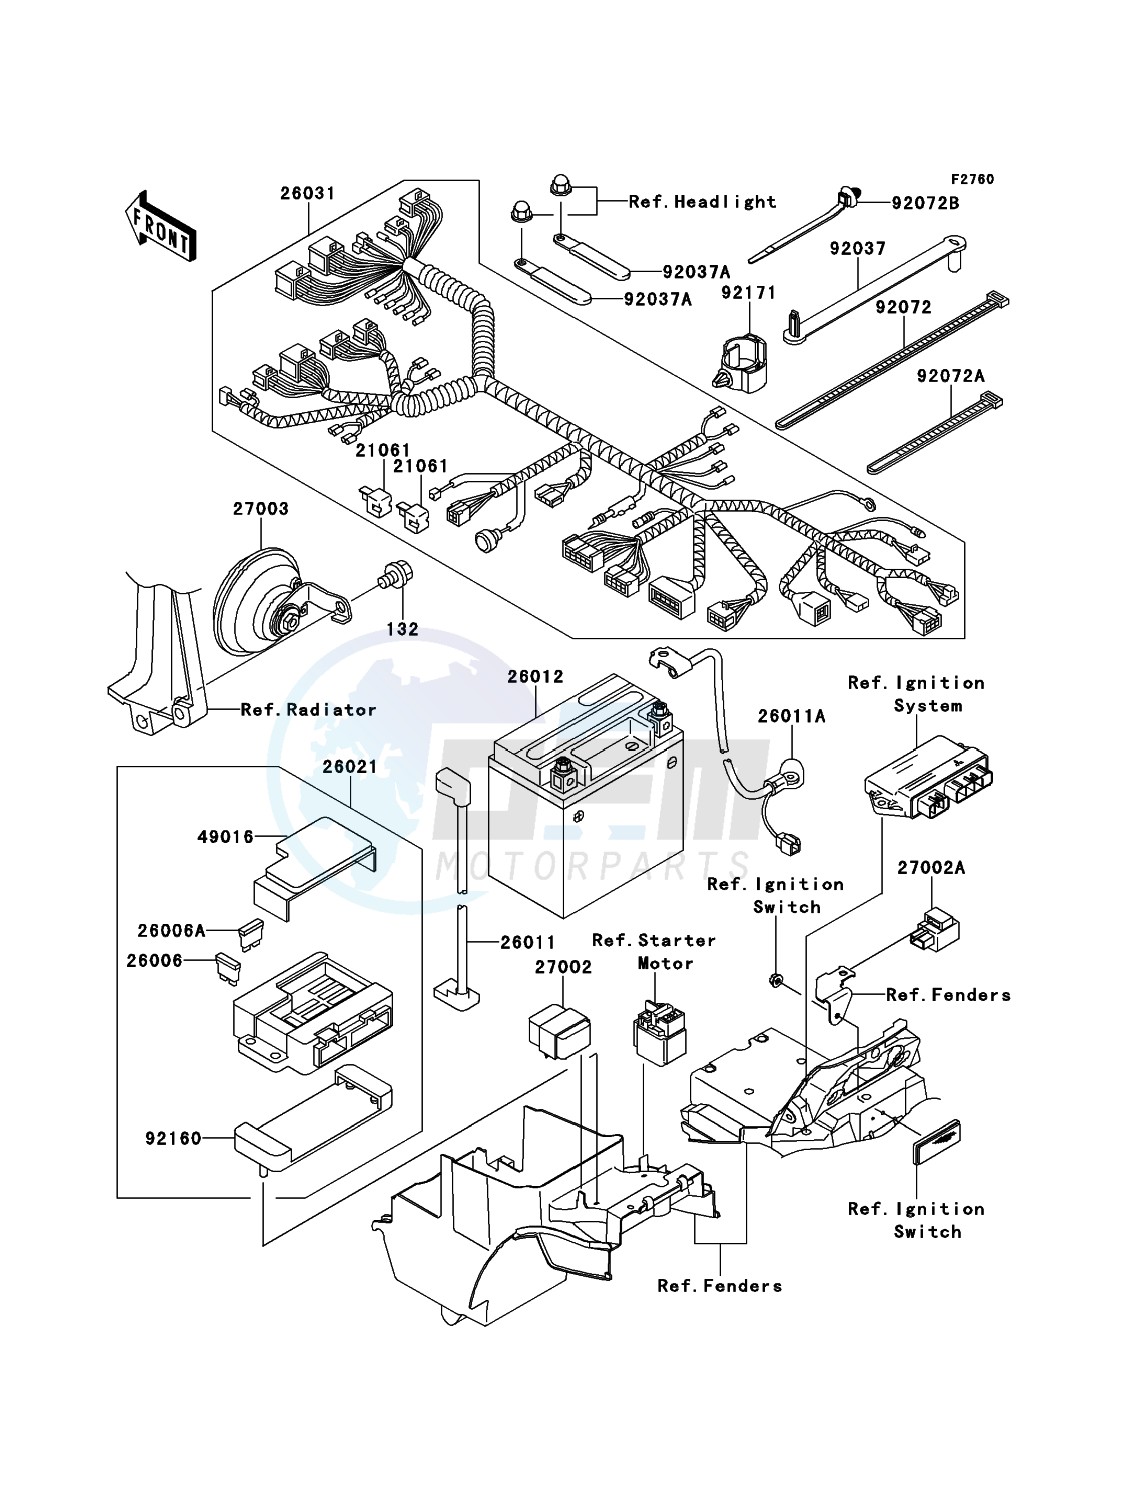 Chassis Electrical Equipment image